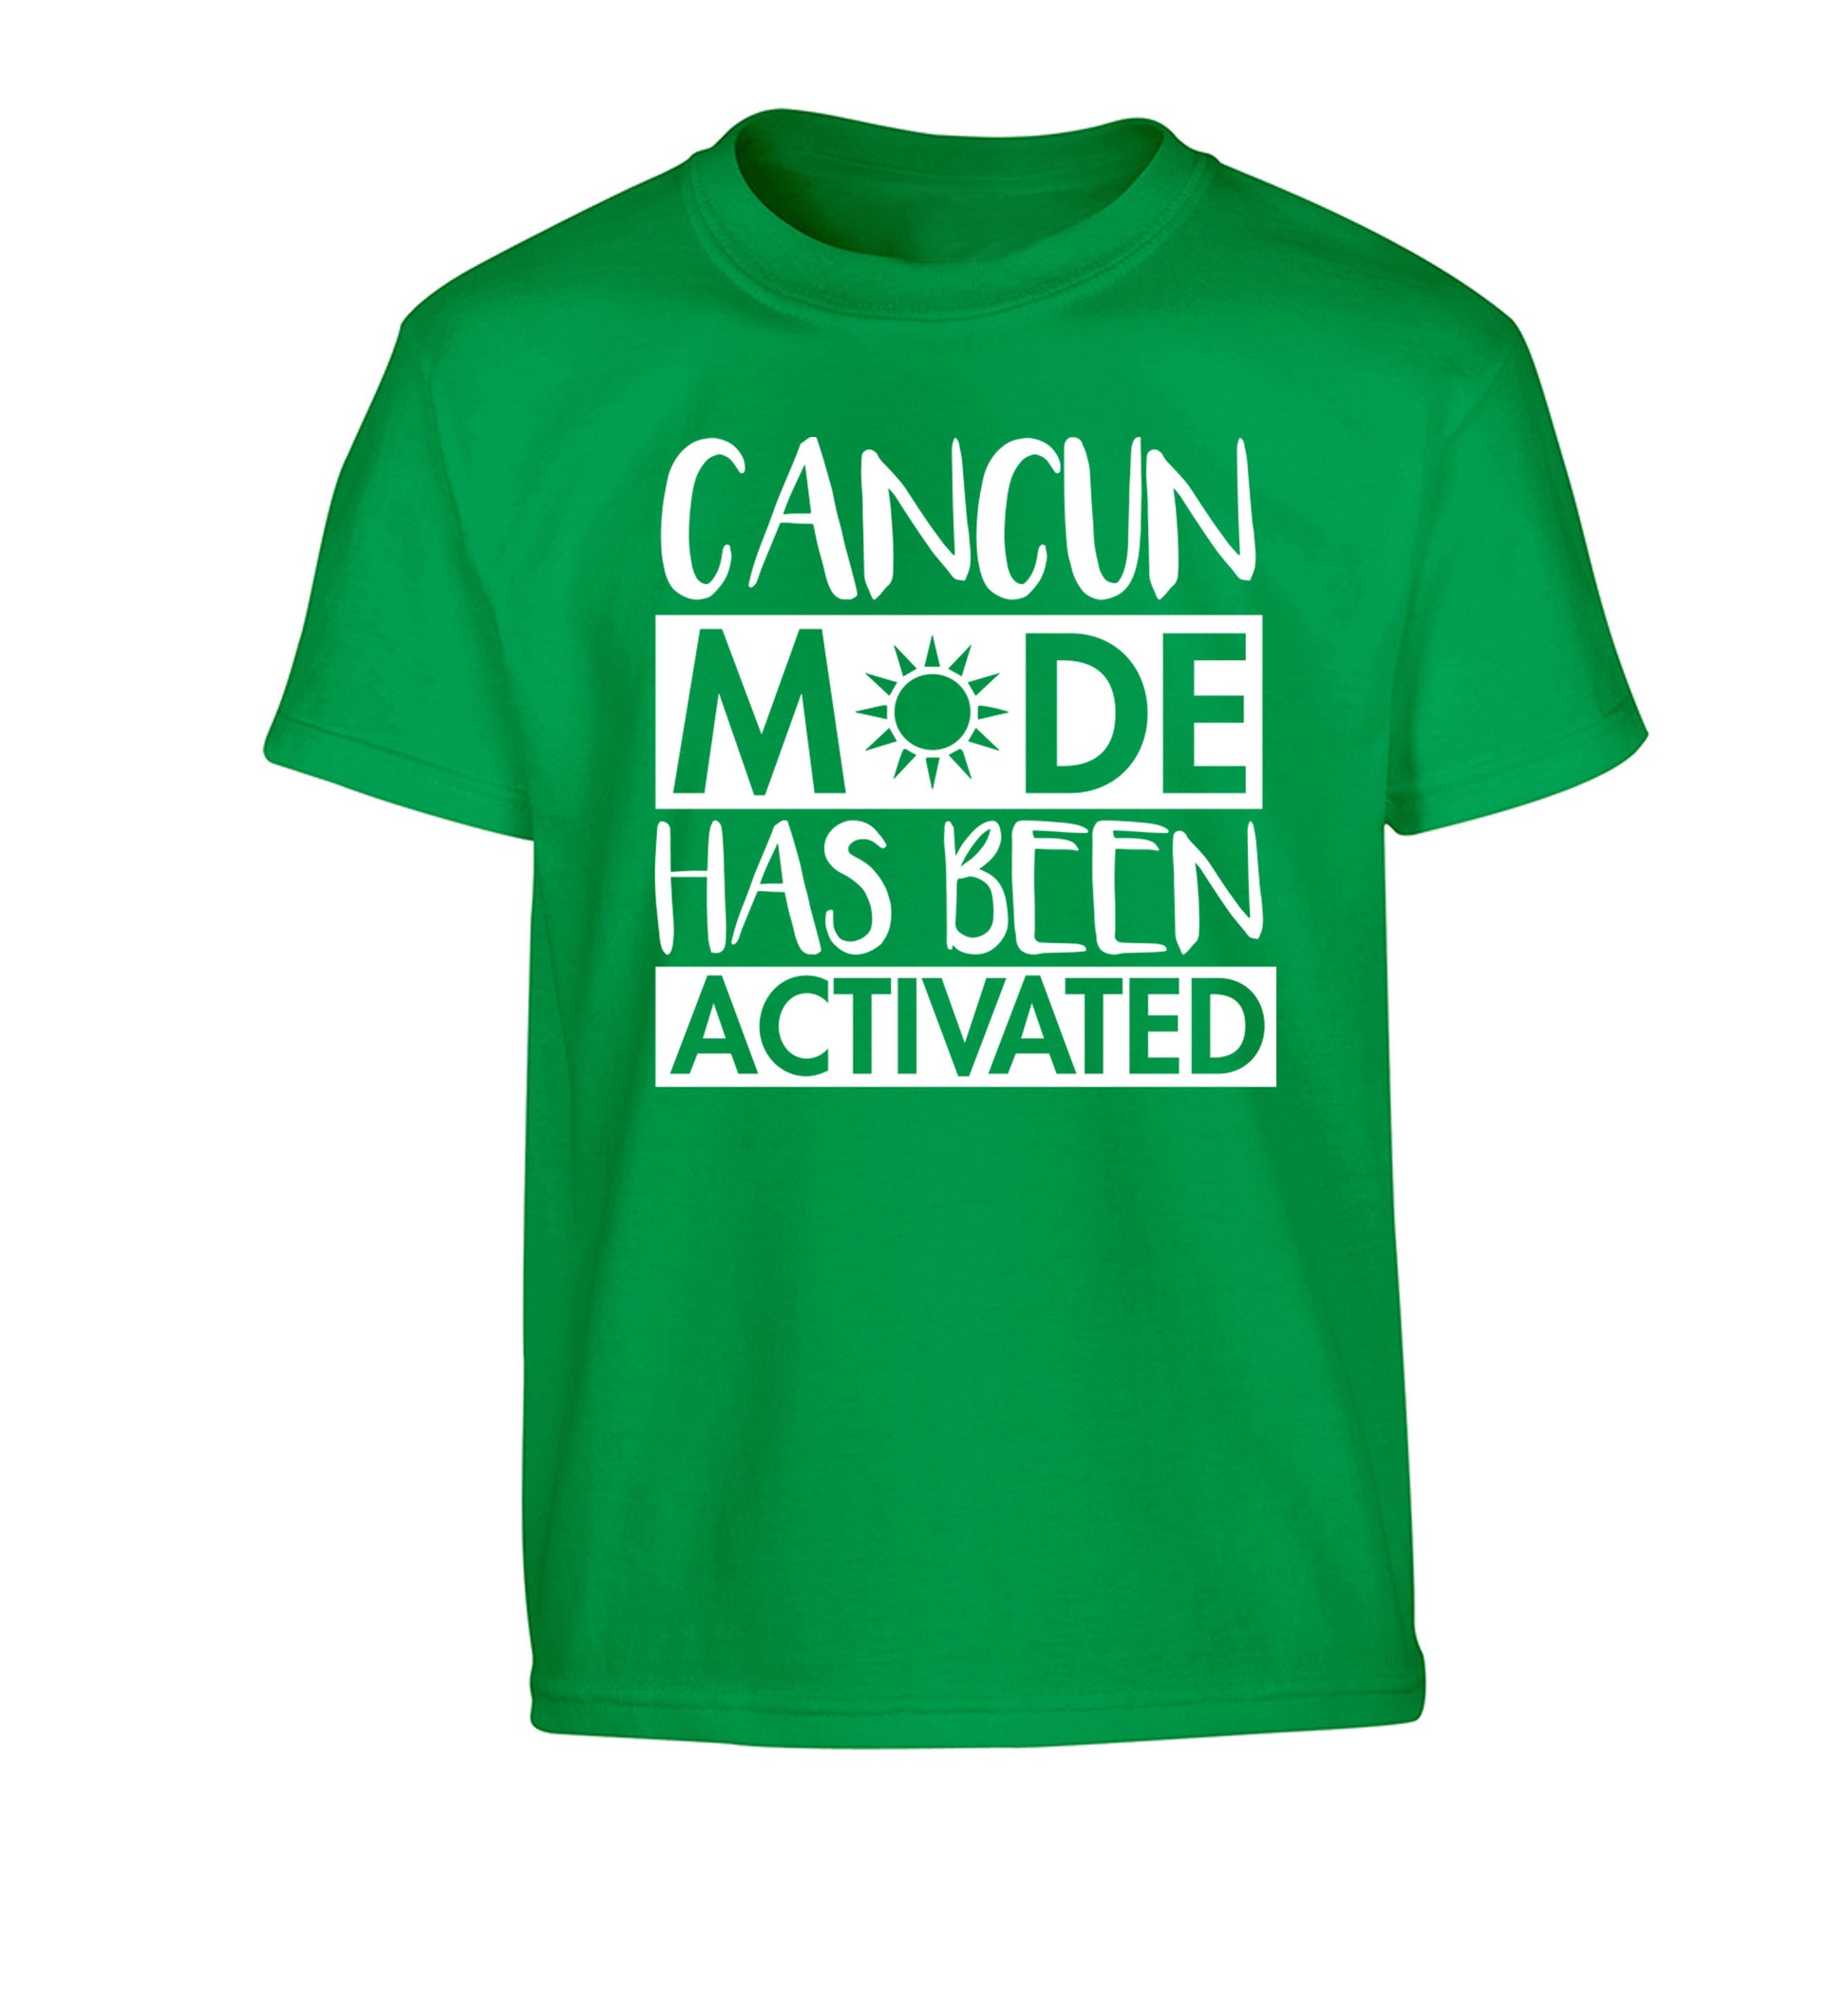 Cancun mode has been activated Children's green Tshirt 12-14 Years